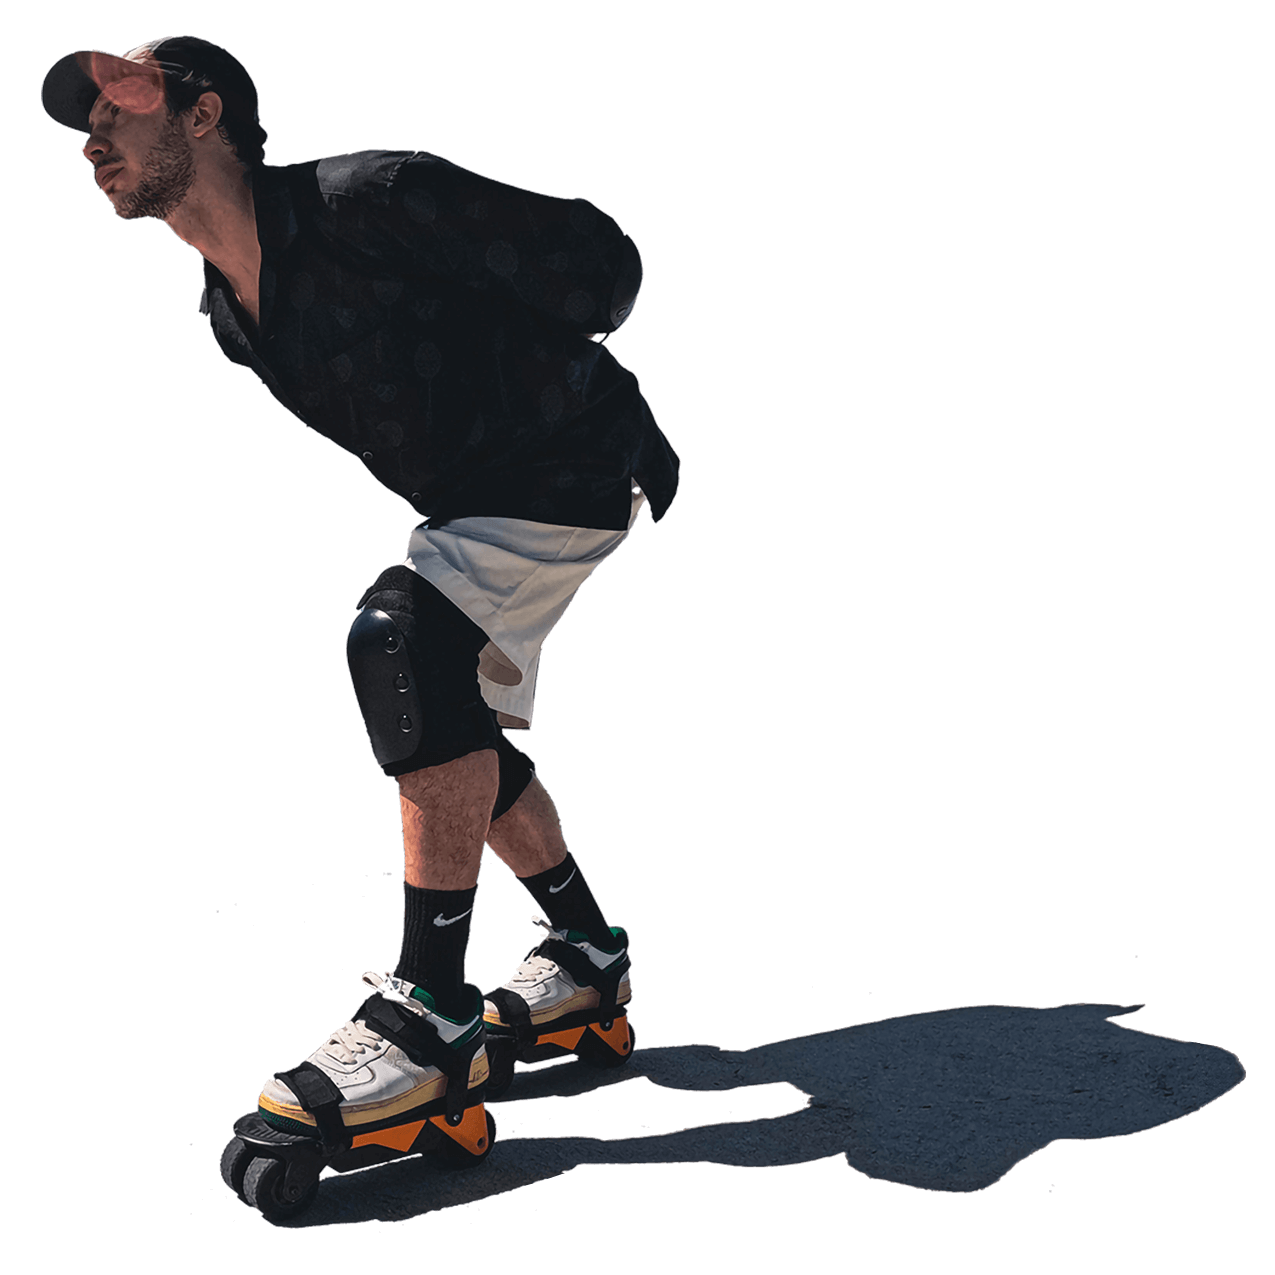 Rushing_around_the_park_with_Rollwalk_eRW3_electric_roller_skates